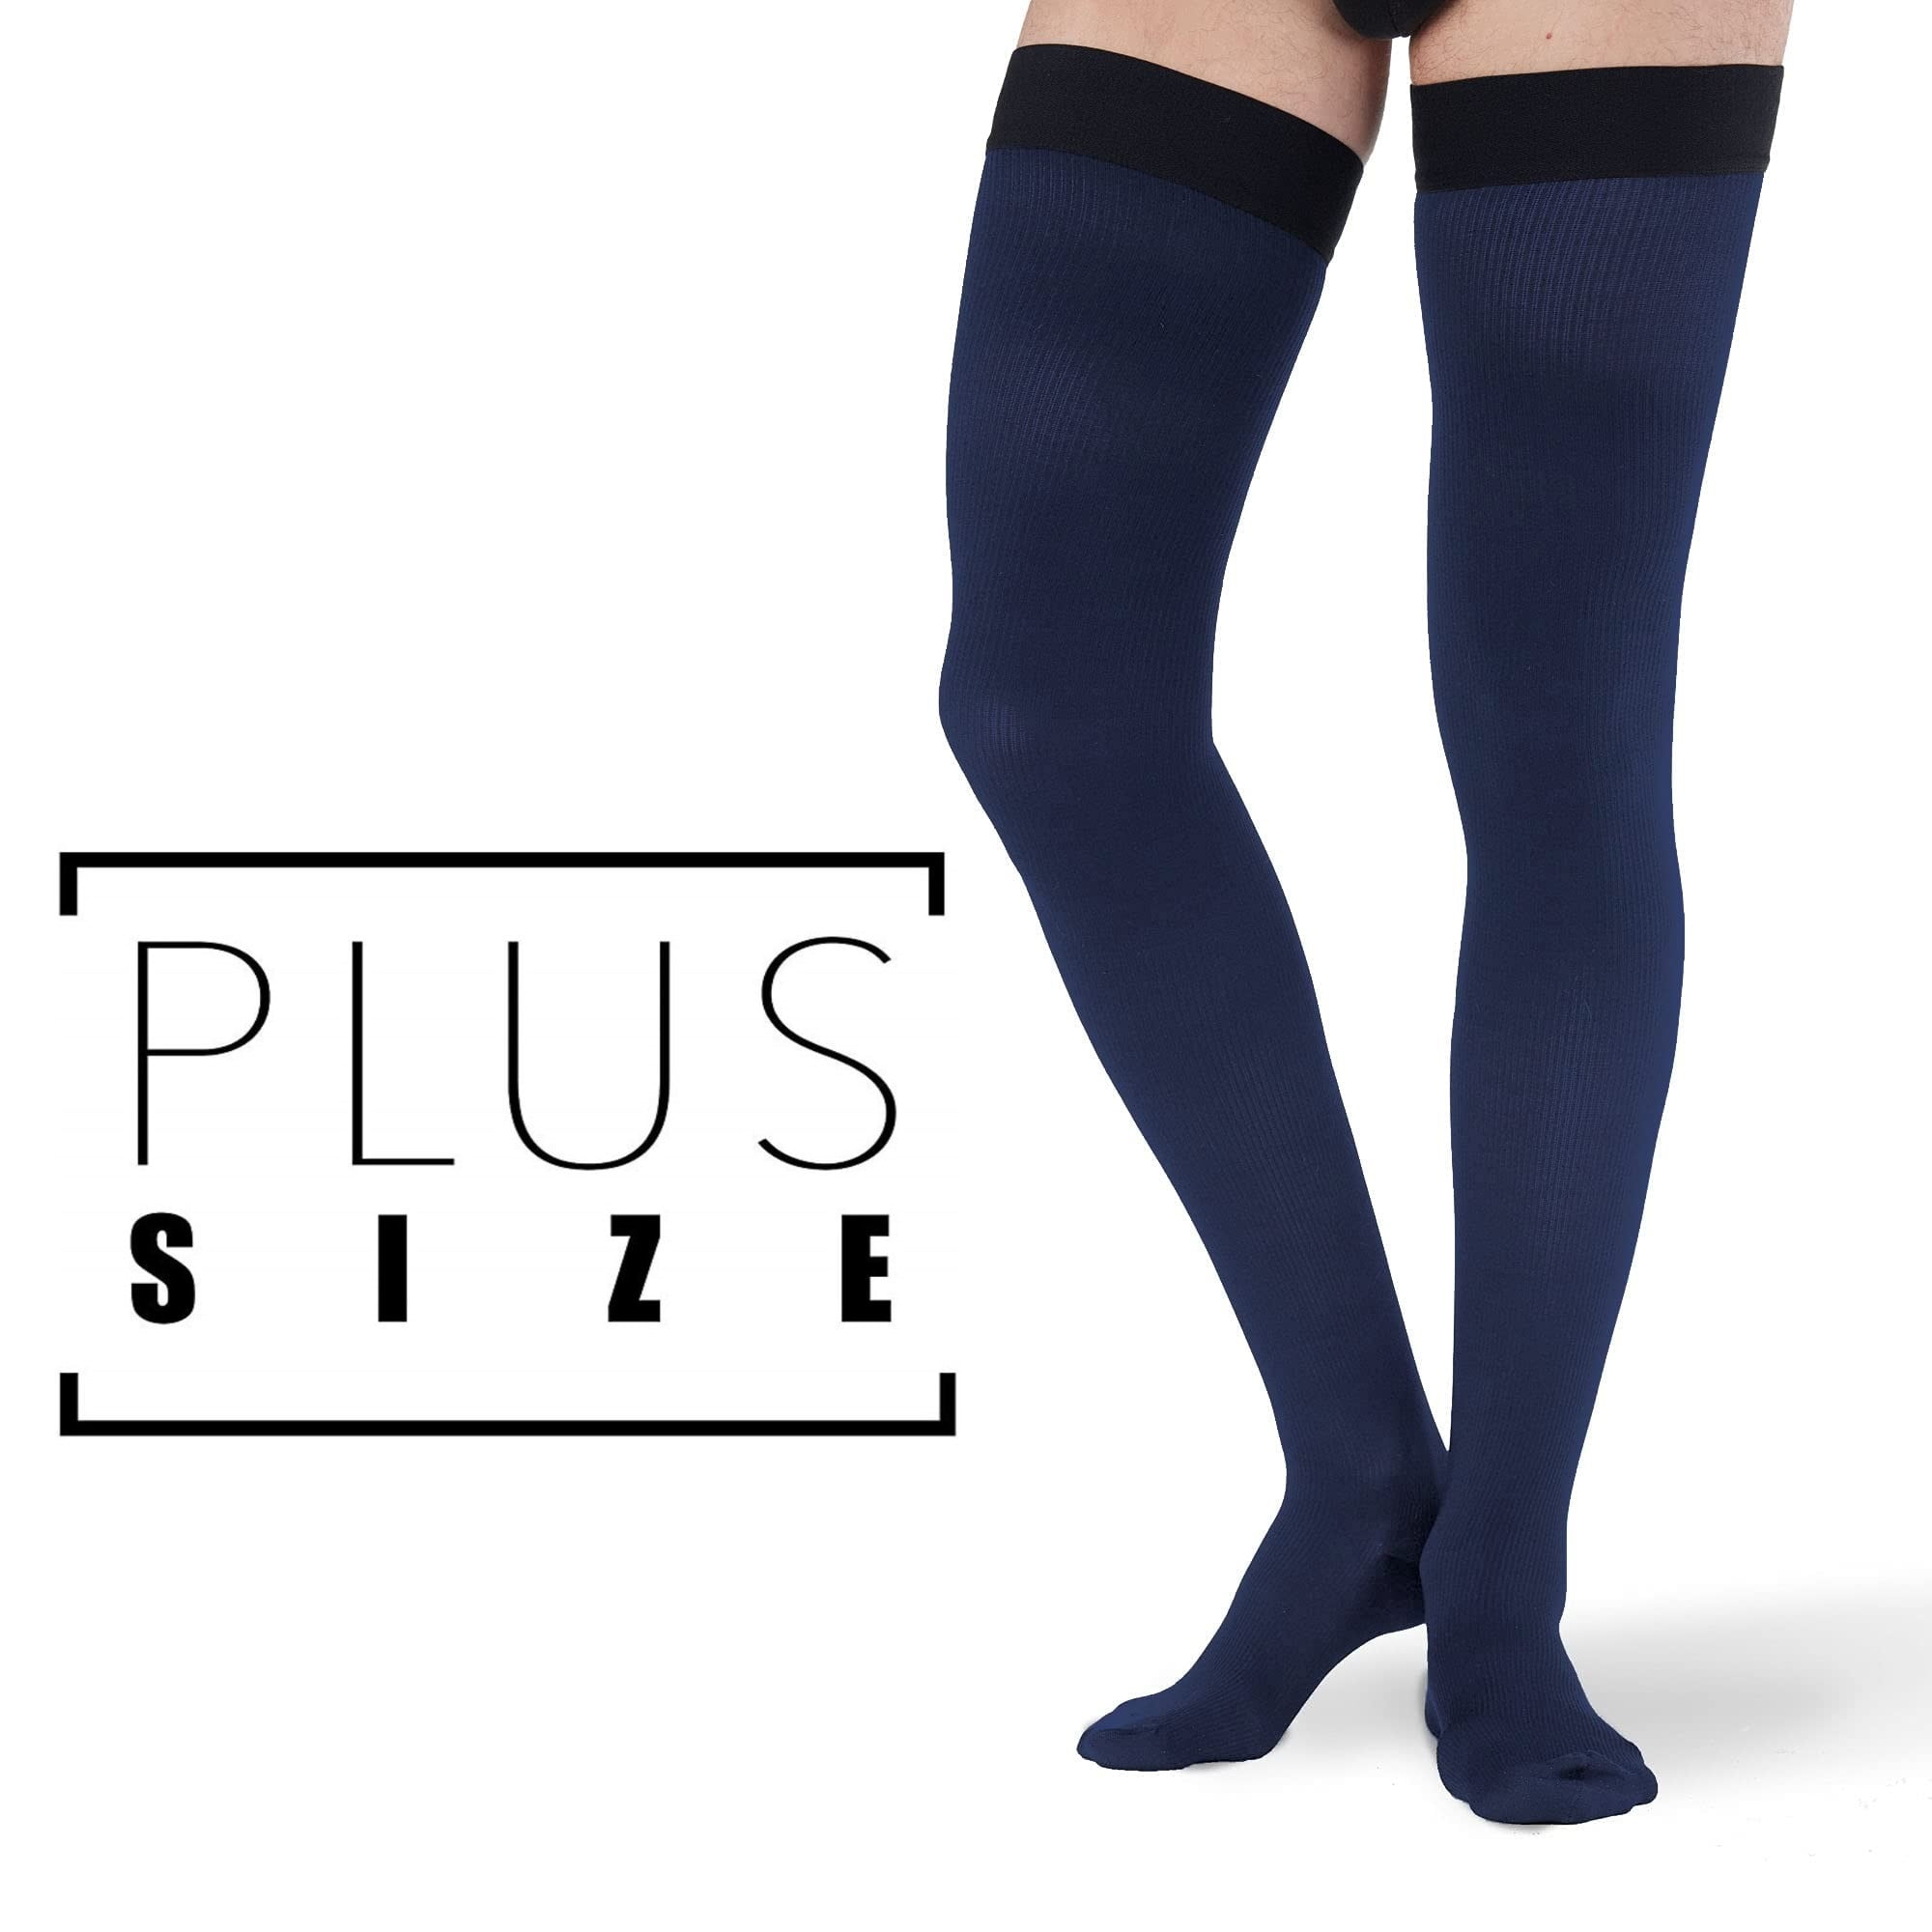 Refeel Plus Size Compression Socks Wide Calf For Women & Men 20-30 mmhg - Large  Size Knee High Support Stockings For Medical 02-Gray/Dark Blue/Light Blue  3X-Large